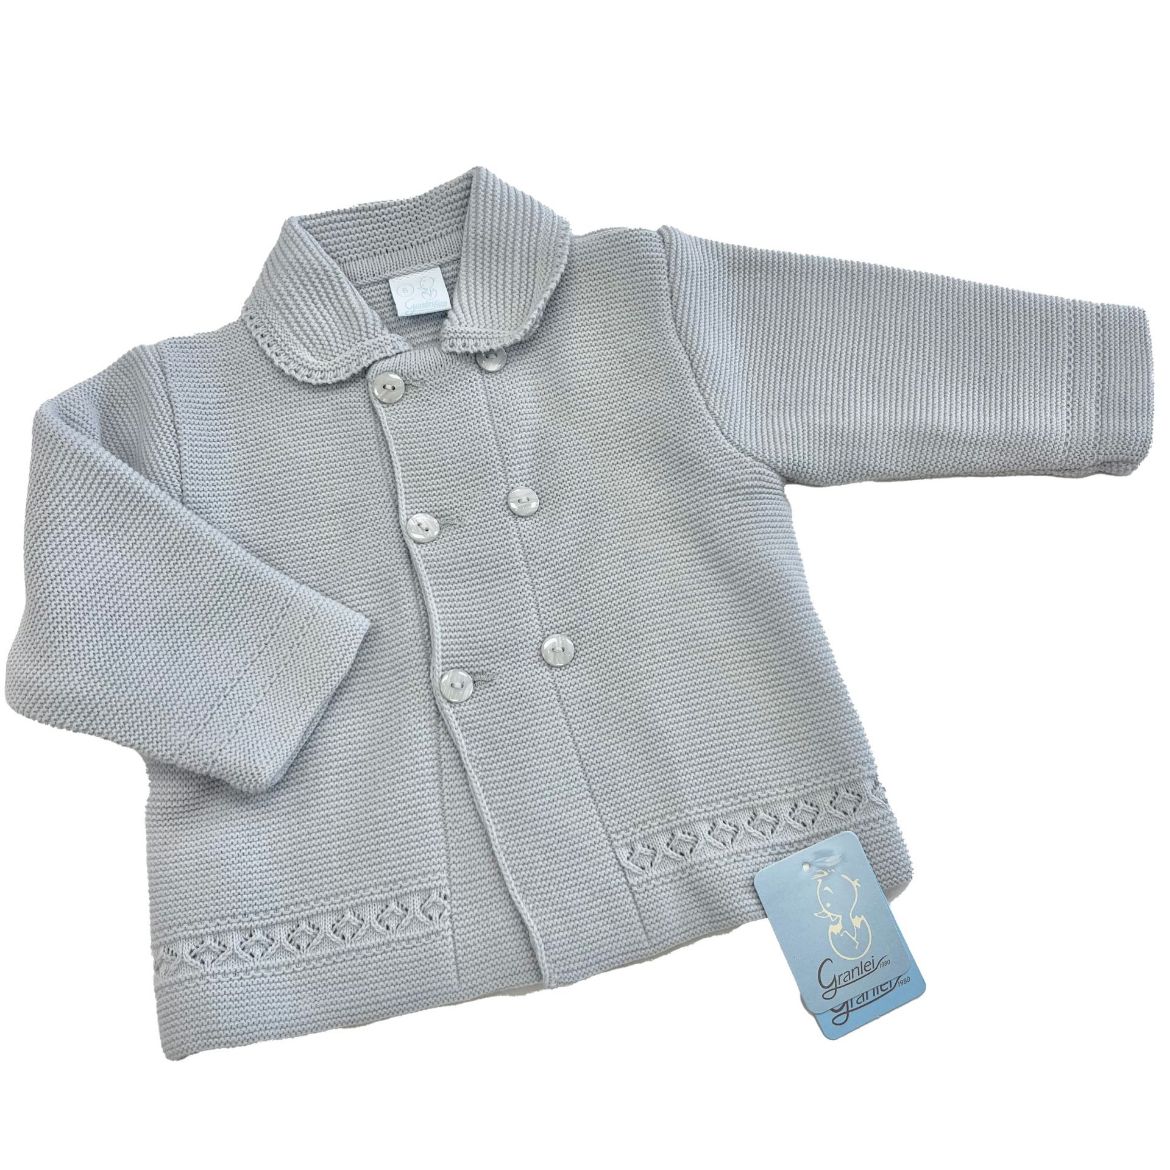 Picture of Granlei Boys Grey Knitted Cardigan